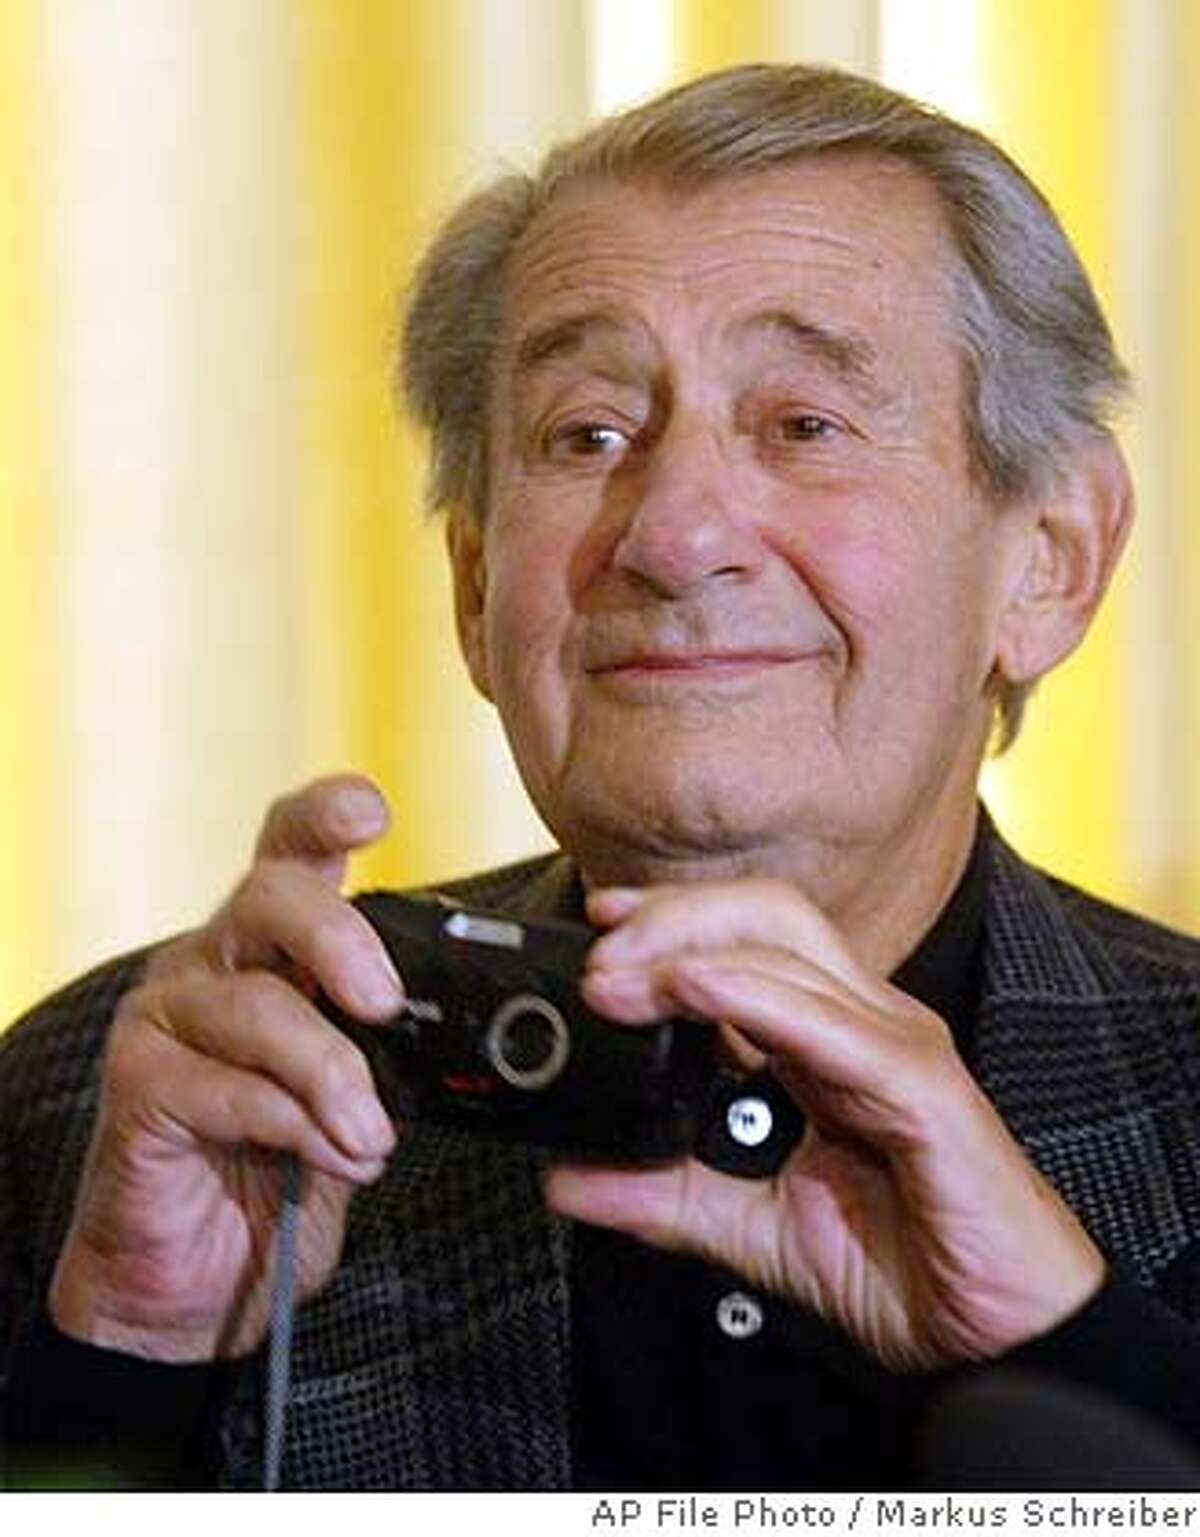 ** FILE ** German born photographer Helmut Newton holds a camera during a news conference after signing the contract for the Newton-Foundation in Berlin, in this Oct. 22, 2003 file photo. Newton was killed in a car crash Friday, Jan. 23, 2004 police said in Hollywood, Calif. He was 83. Newton, a fashion photographer whose work appeared in magazines such as Playboy, Elle and Vogue, was best known for his stark, black and white nude photos. (AP Photo/Markus Schreiber)